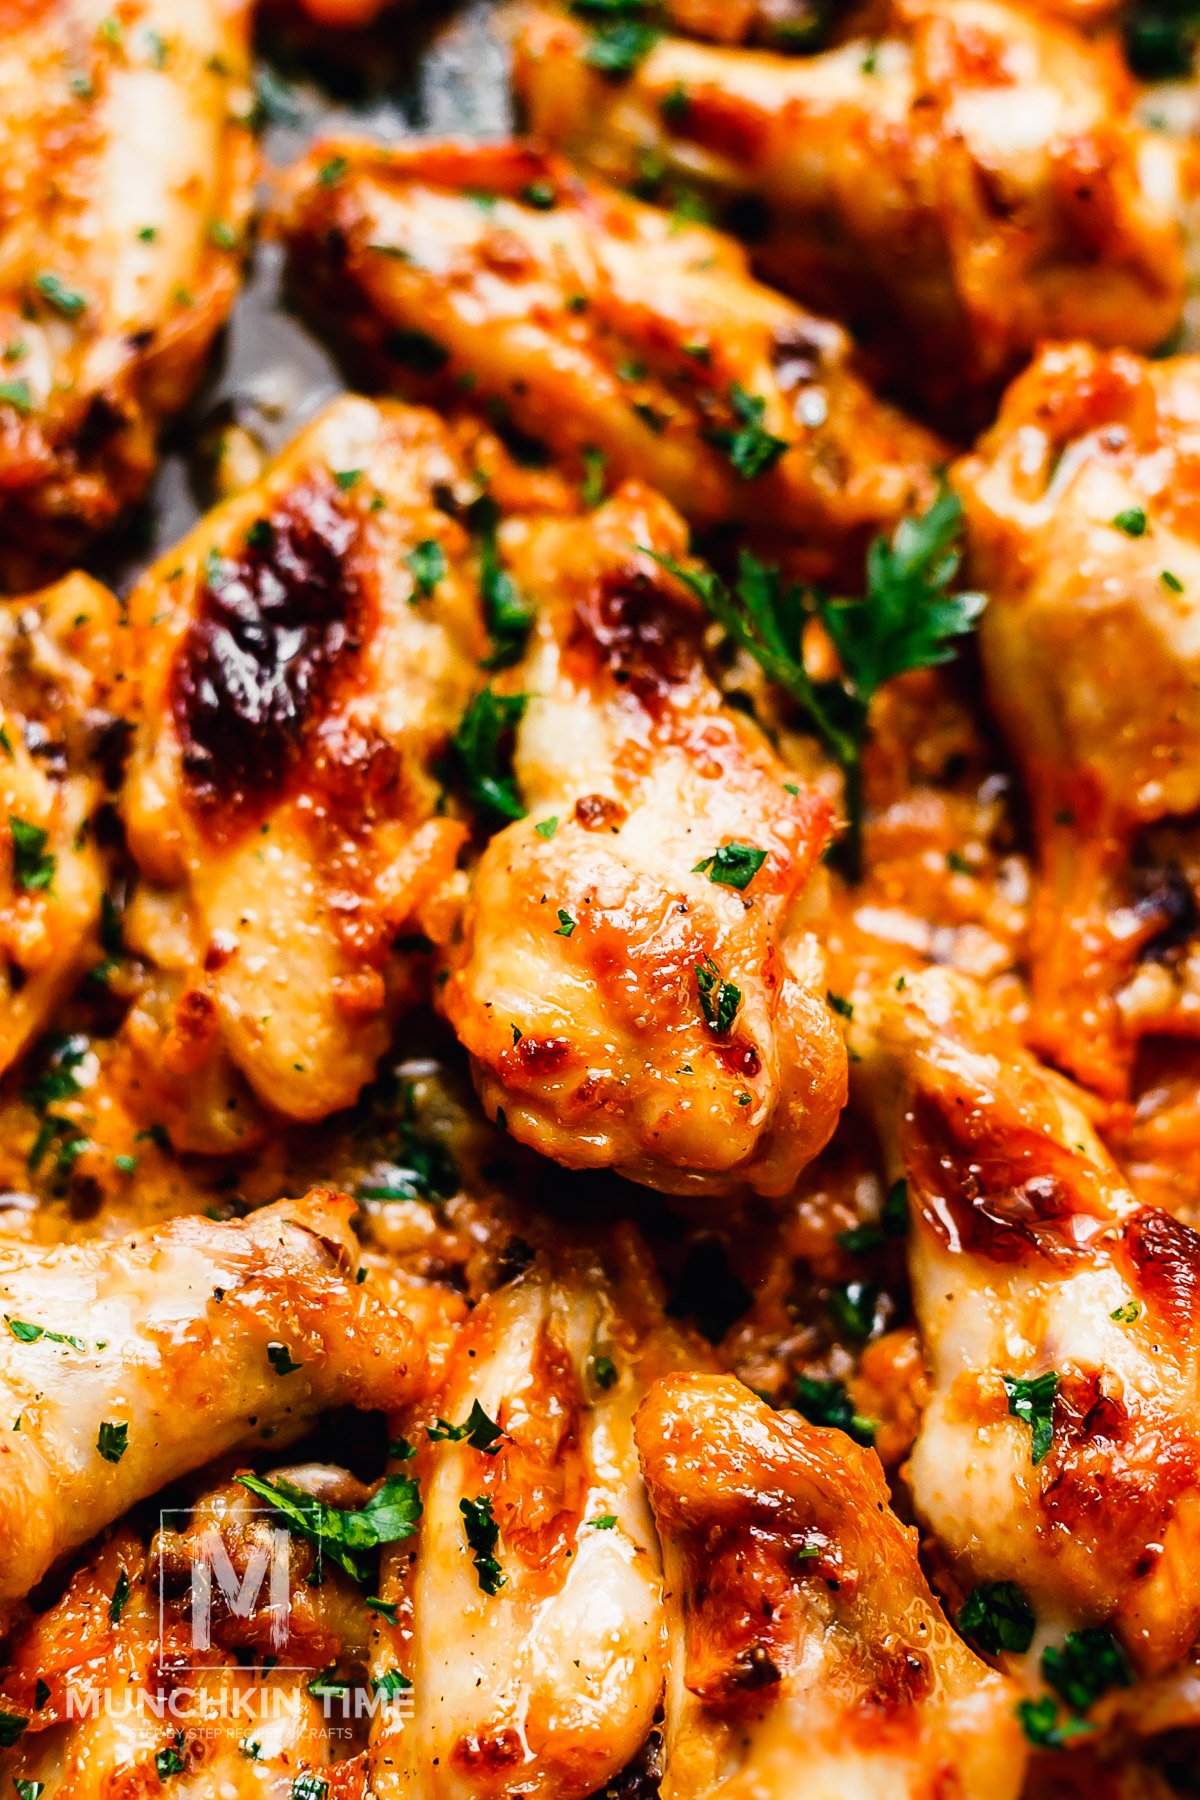 Oven Baked Chicken Wings Recipe - Munchkin Time